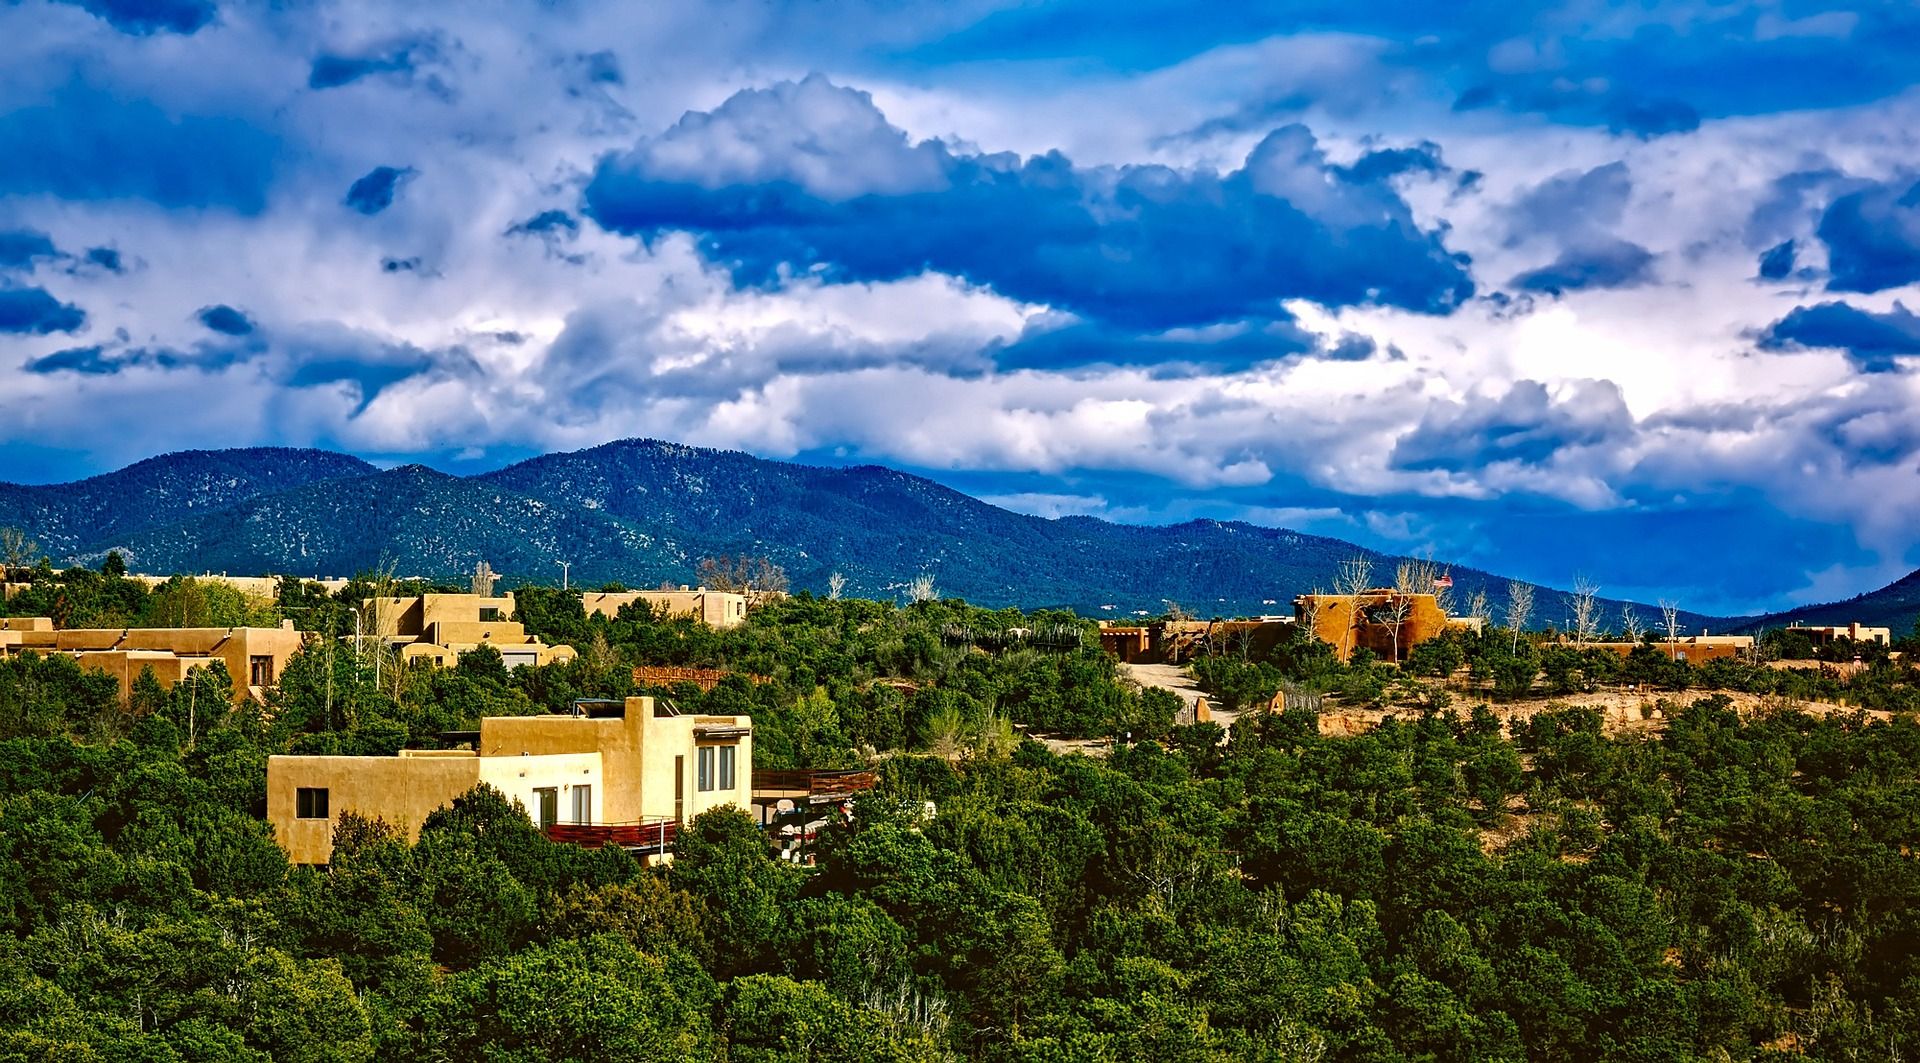 Aerial view of buildings and homes nestled in the mountains in Santa Fe, New Mexico